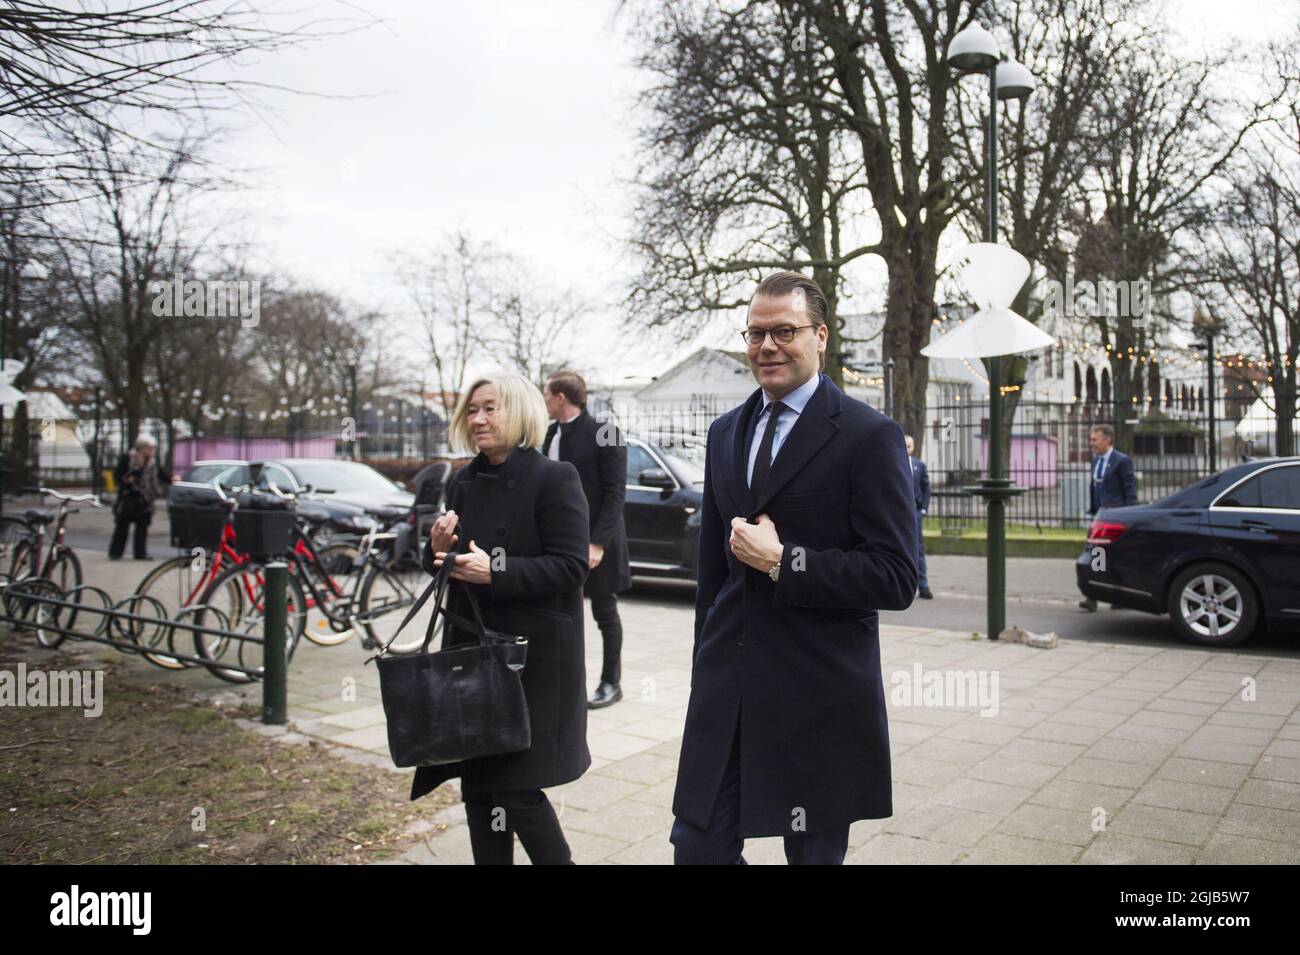 MALMO 2018-02-15 Prince Daniel Annelie Hultén, Governor of Skane, the visit to the Cross centre in Malmo, Sweden on Thursday. Photo: Emil Langvad / TT / code 9290 Stock Photo - Alamy